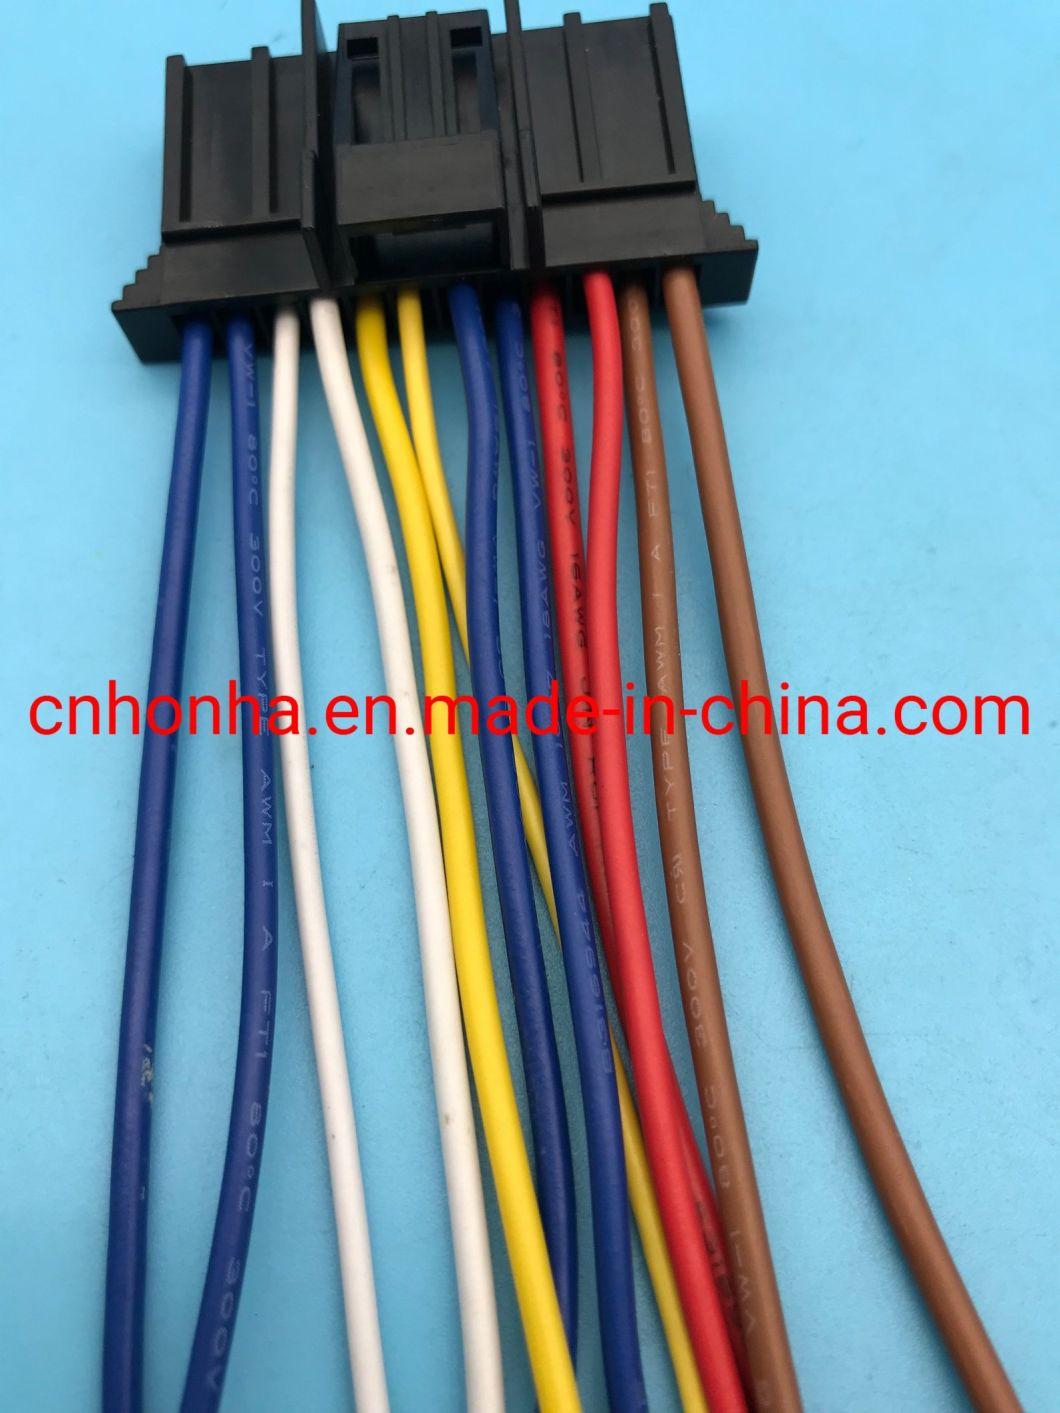 211PC122s0017 12 Pin Female Electrical Connector Harness